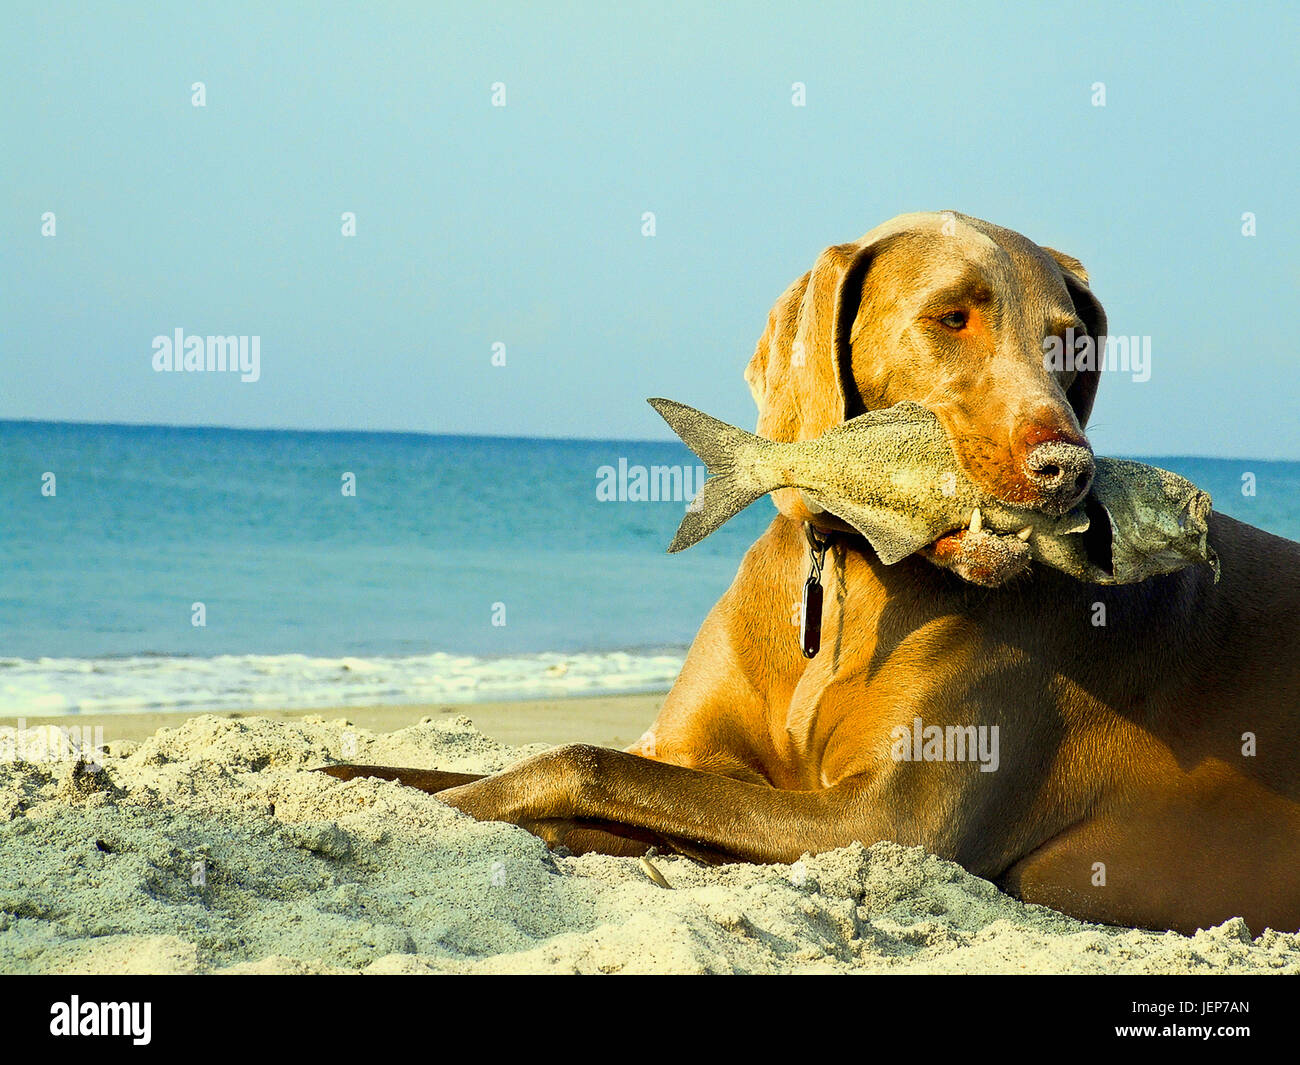 Dog with fish in mouth at beach Stock Photo